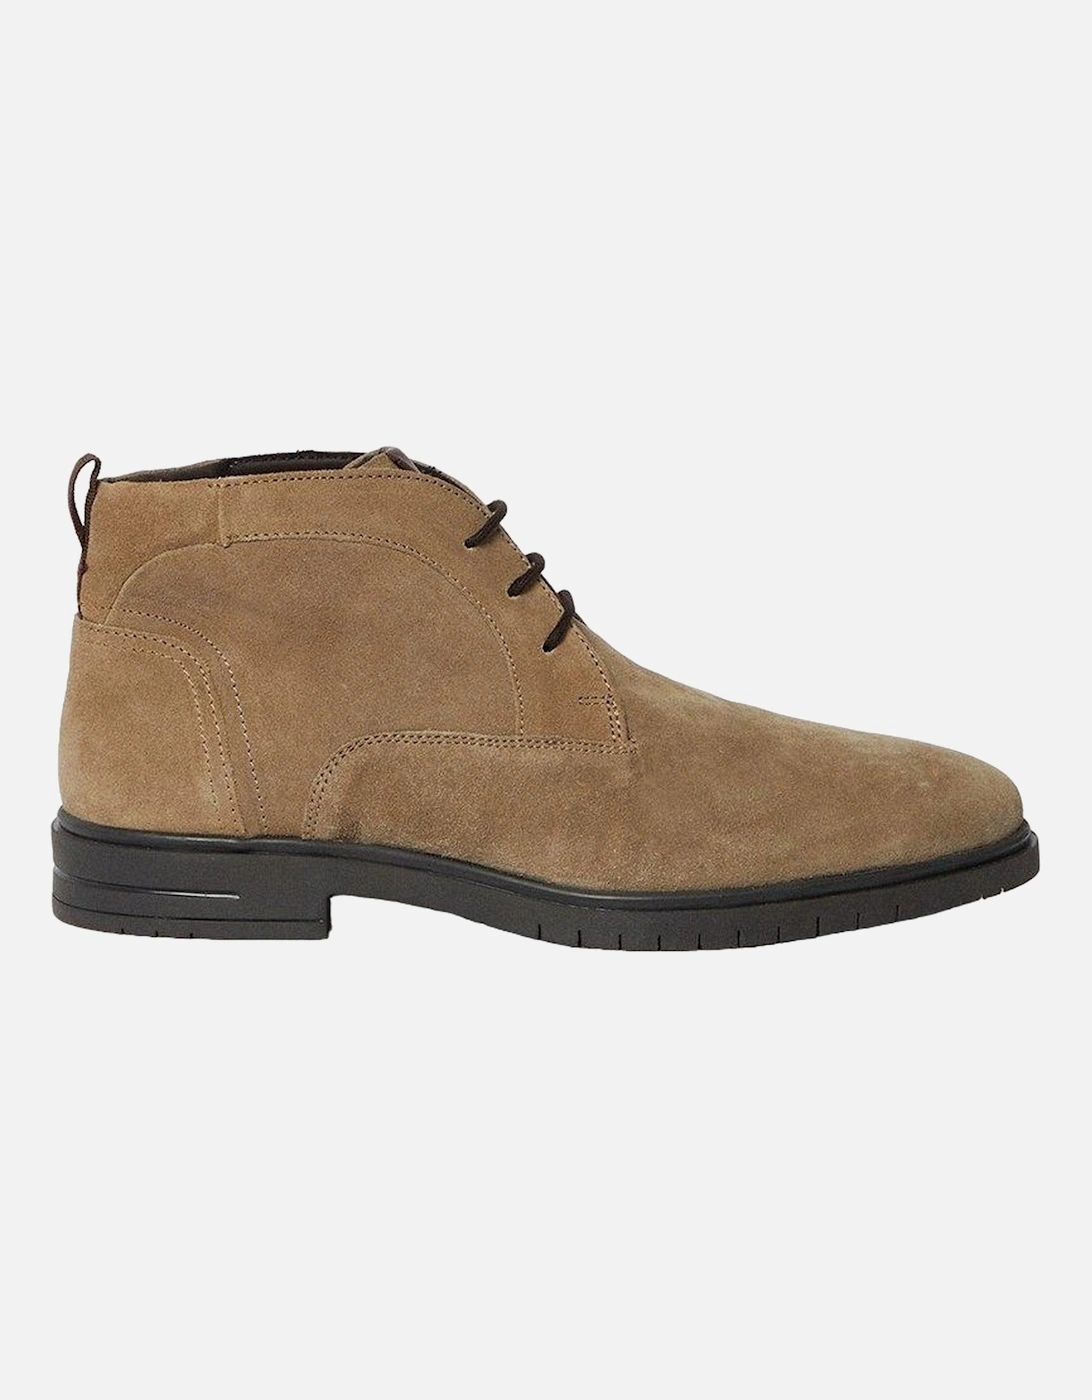 Mens Richie Suede Lace Up Chukka Boots